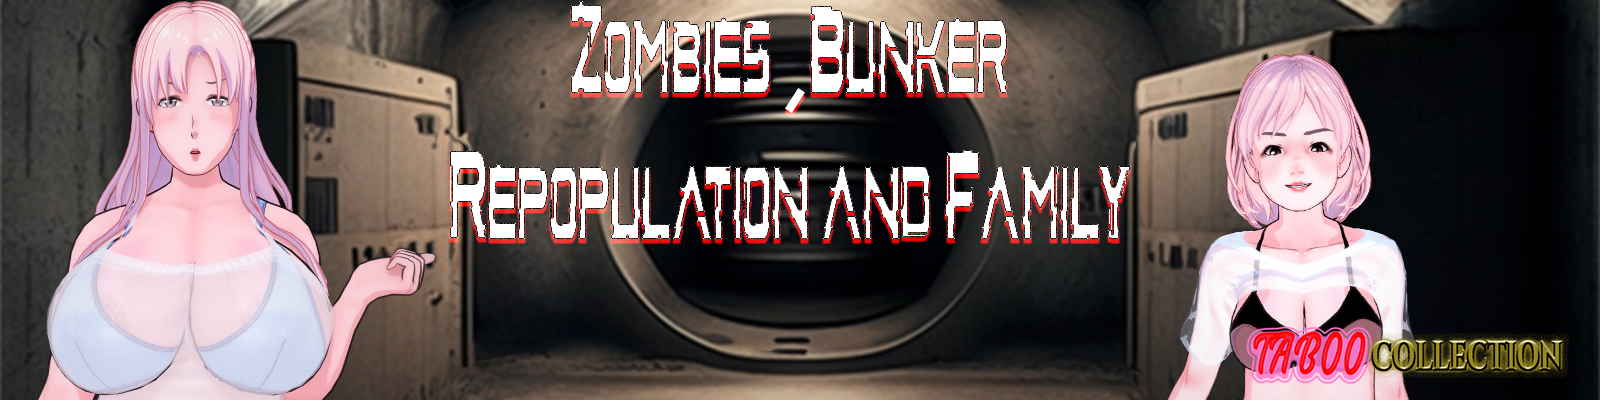 Zombies Bunker Repopulation and Family